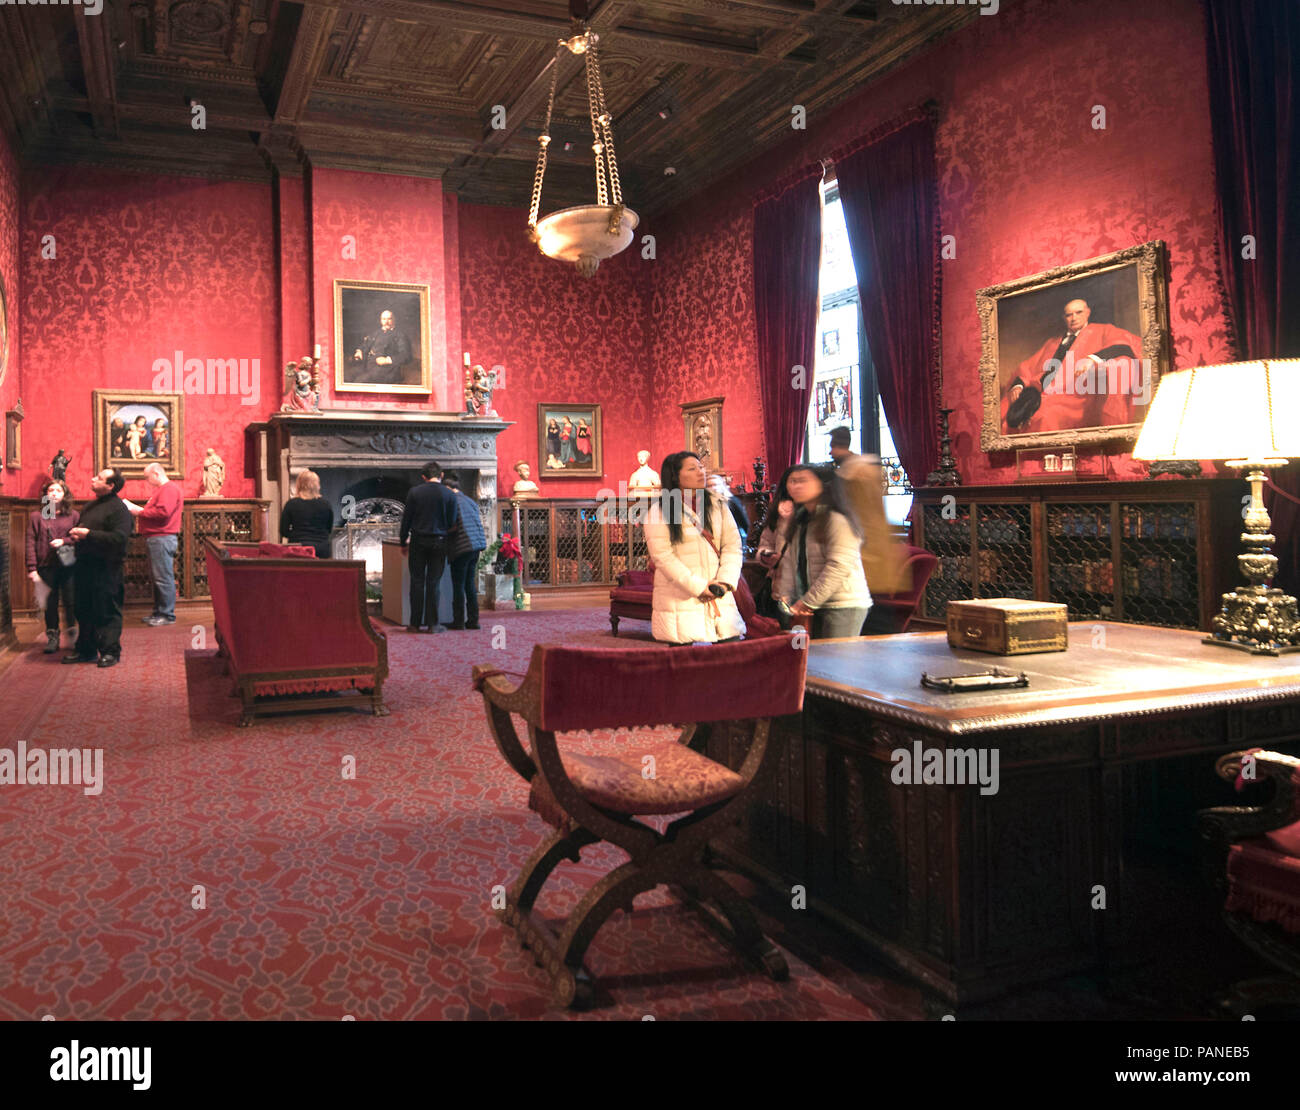 The West Room of the Morgan Library & Museum was used by financier